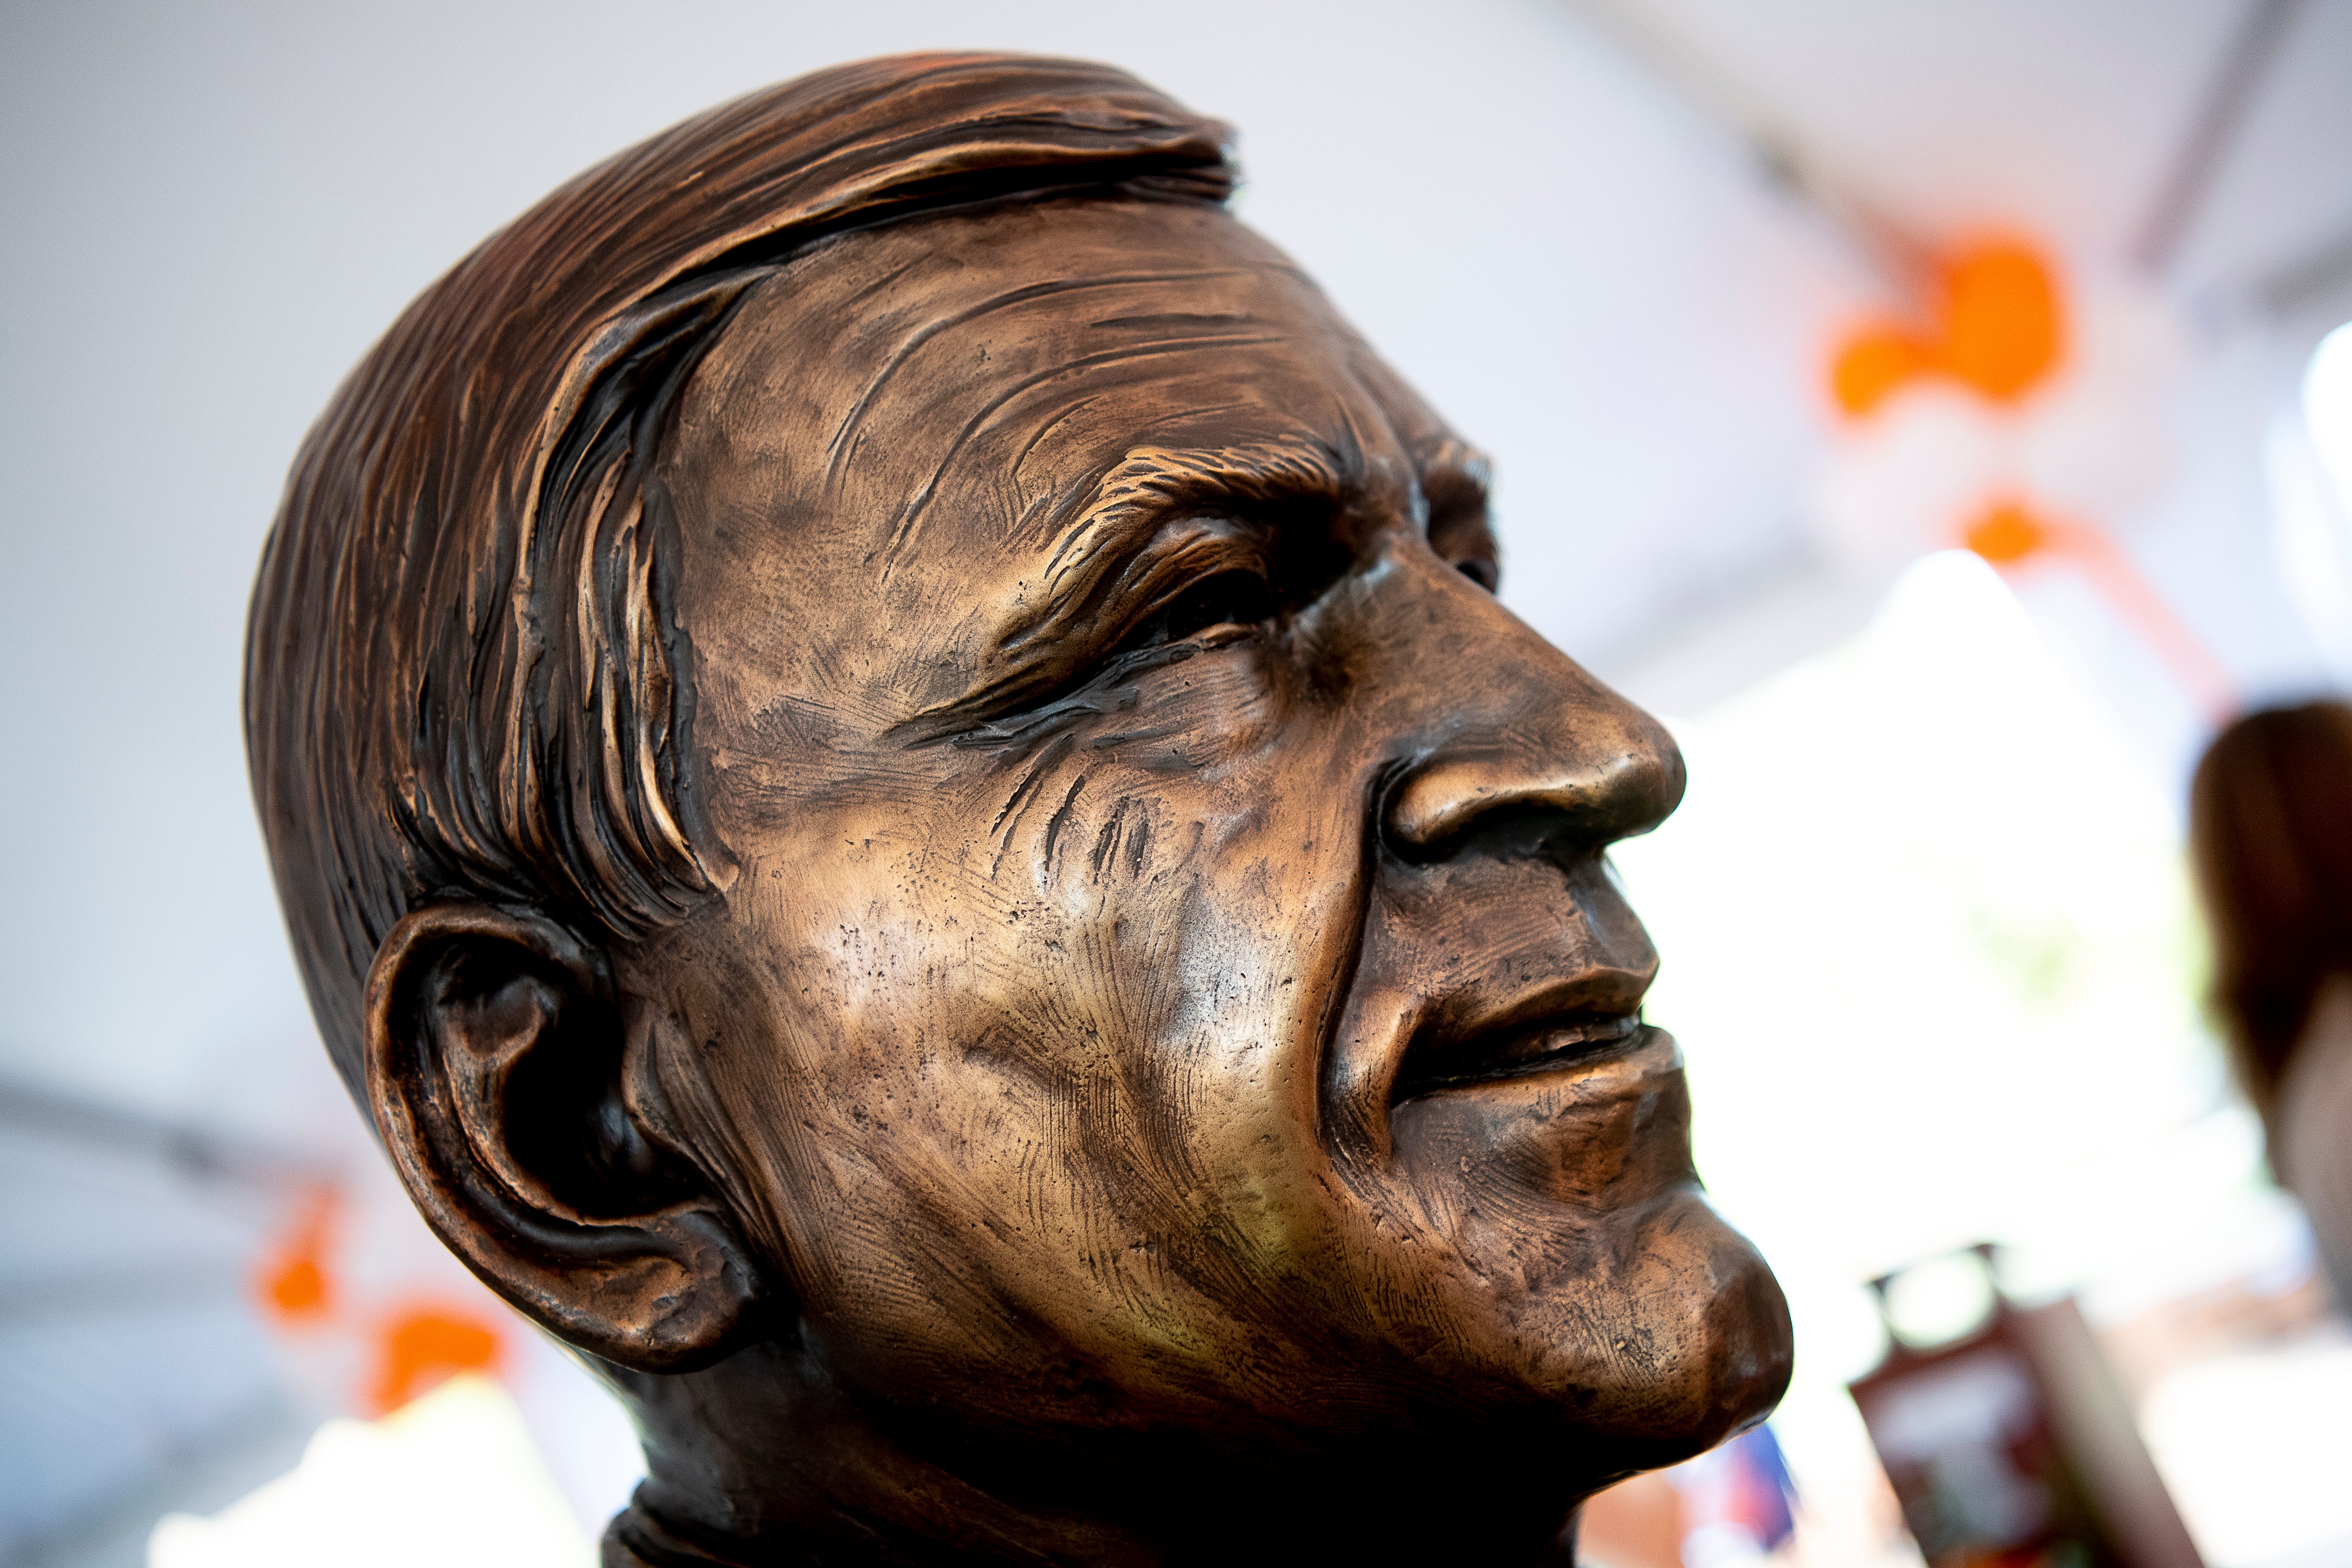 A bust of former Tennessee football coach Doug Dickey is unveiled during a dedication ceremony of the Doug Dickey Hall of Fame Plaza at the Neyland-Thompson Sports Complex in Knoxville, Tennessee on Friday, October 4, 2019. Dickey led UT to its second SEC title in 1969 and served as the Vols' Director of Athletics from 1986 to 2003.